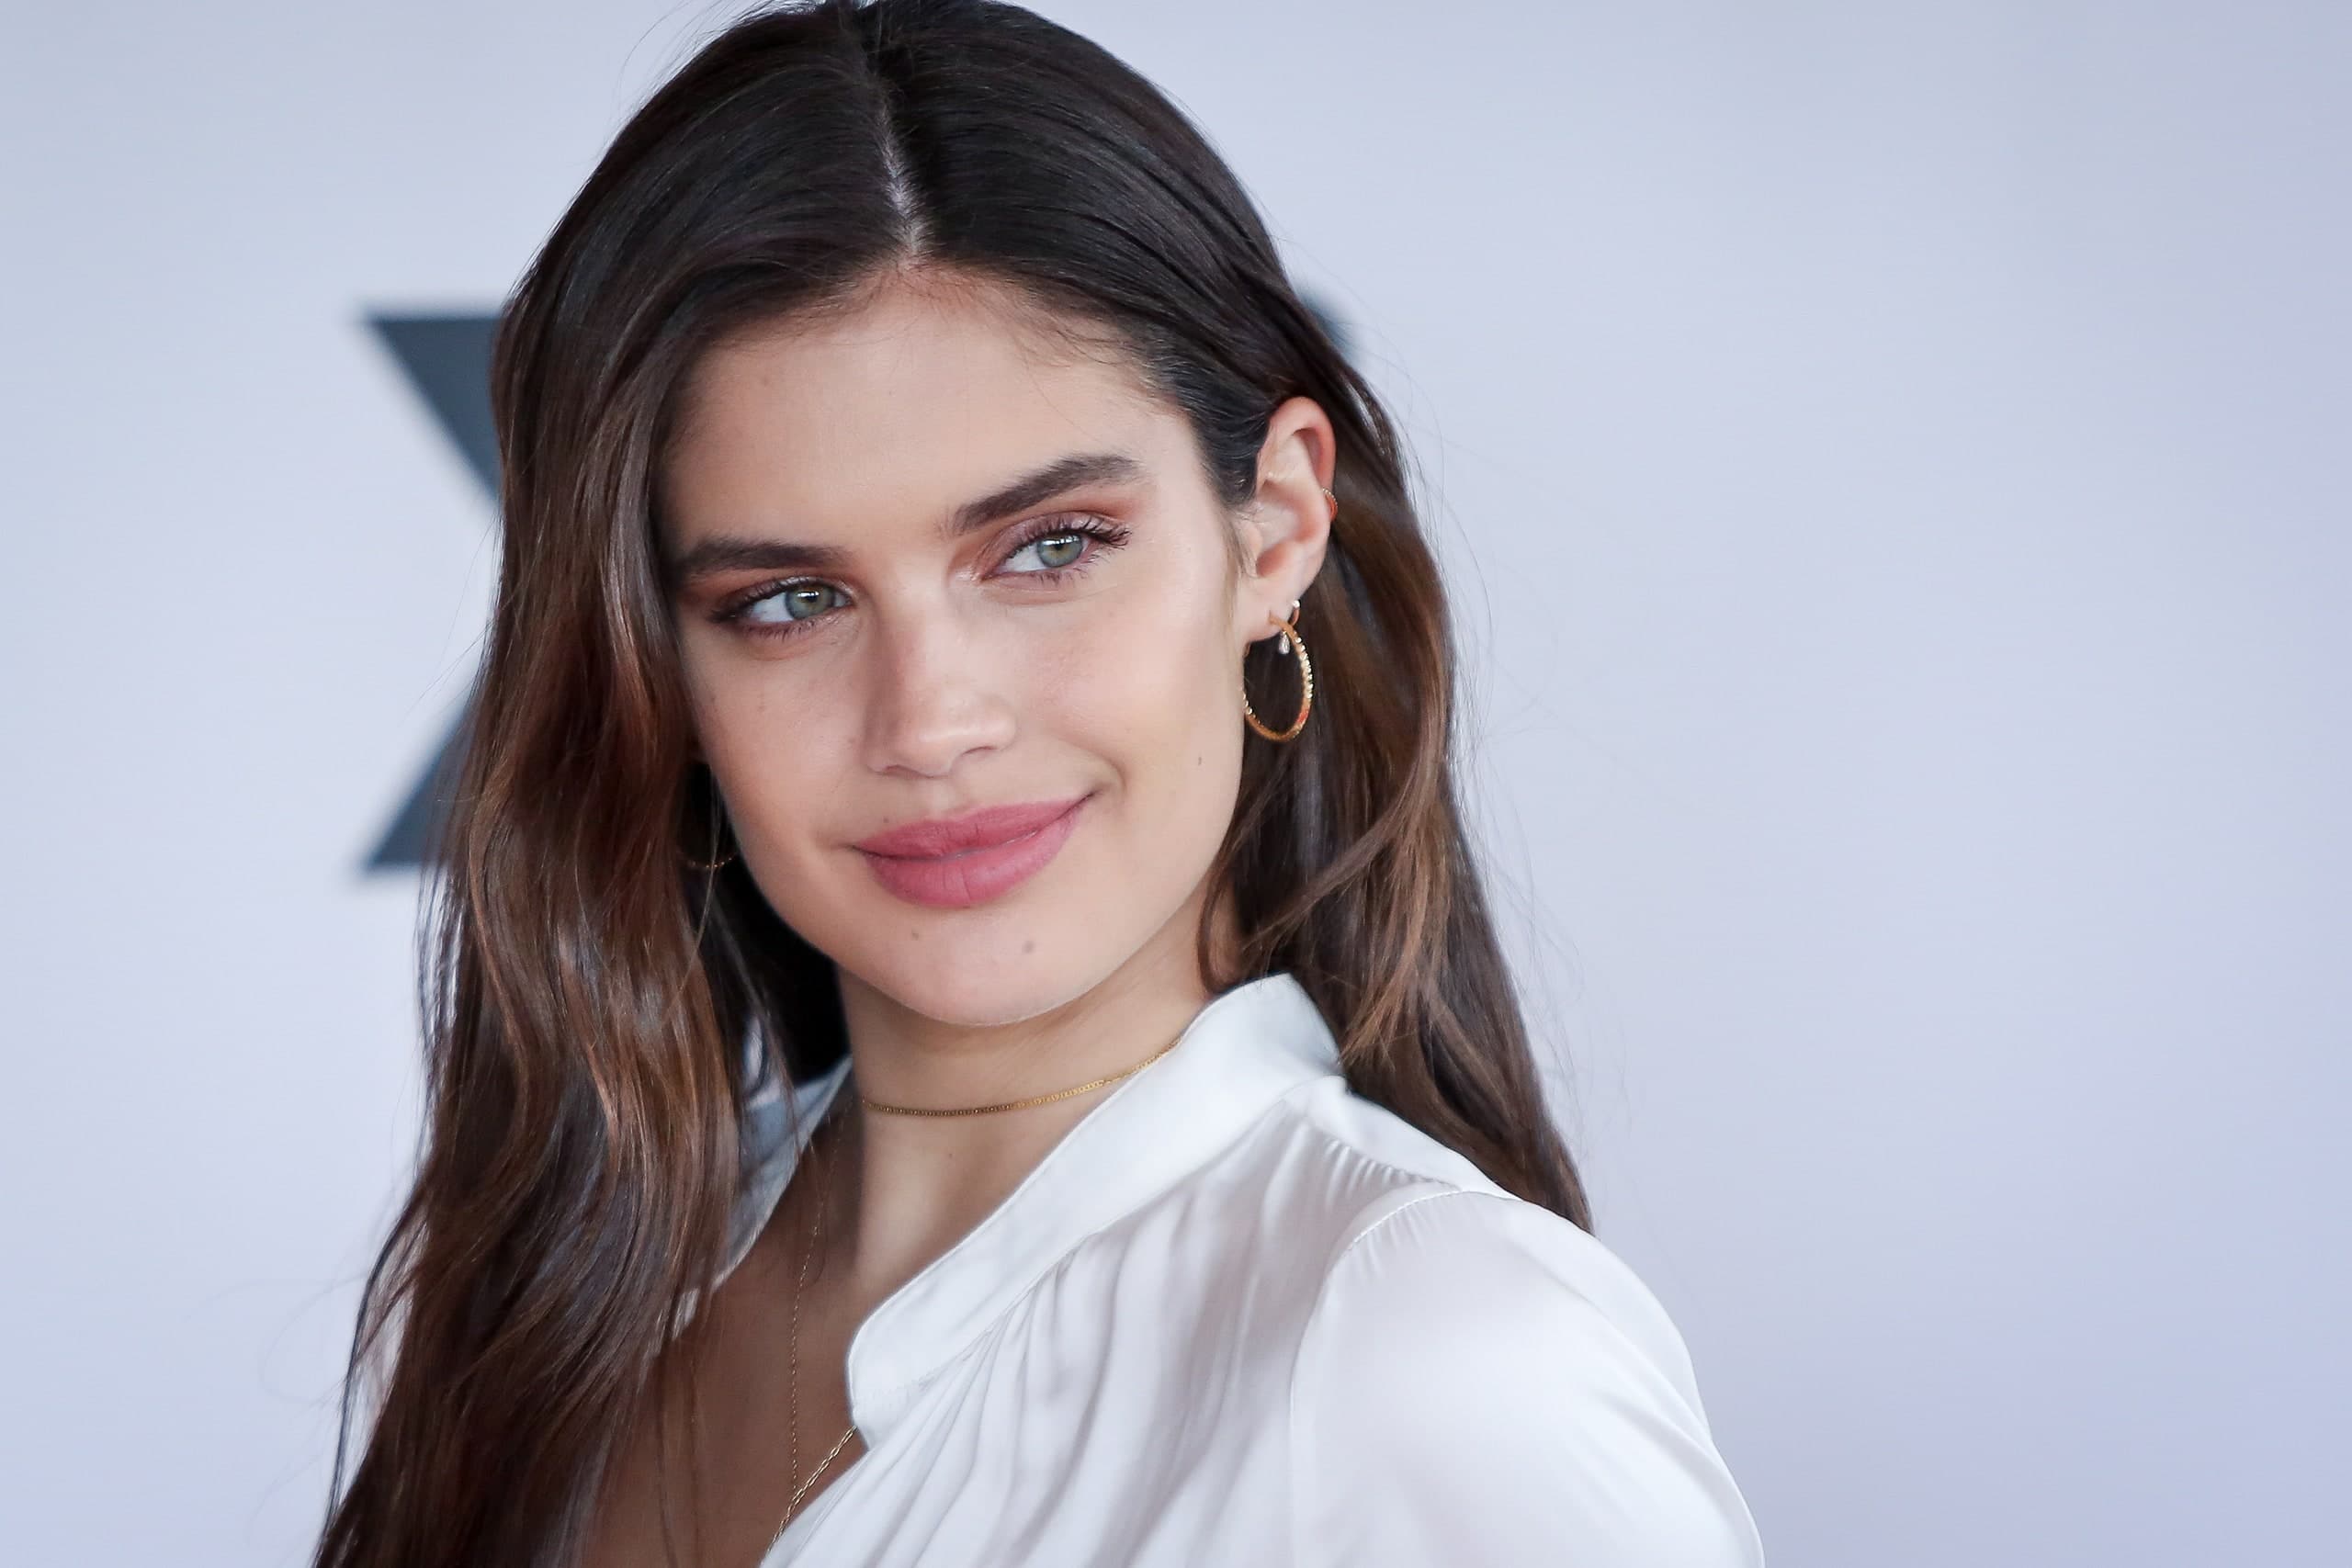 https://facts.net/wp-content/uploads/2023/07/42-facts-about-sara-sampaio-1690726600.jpg